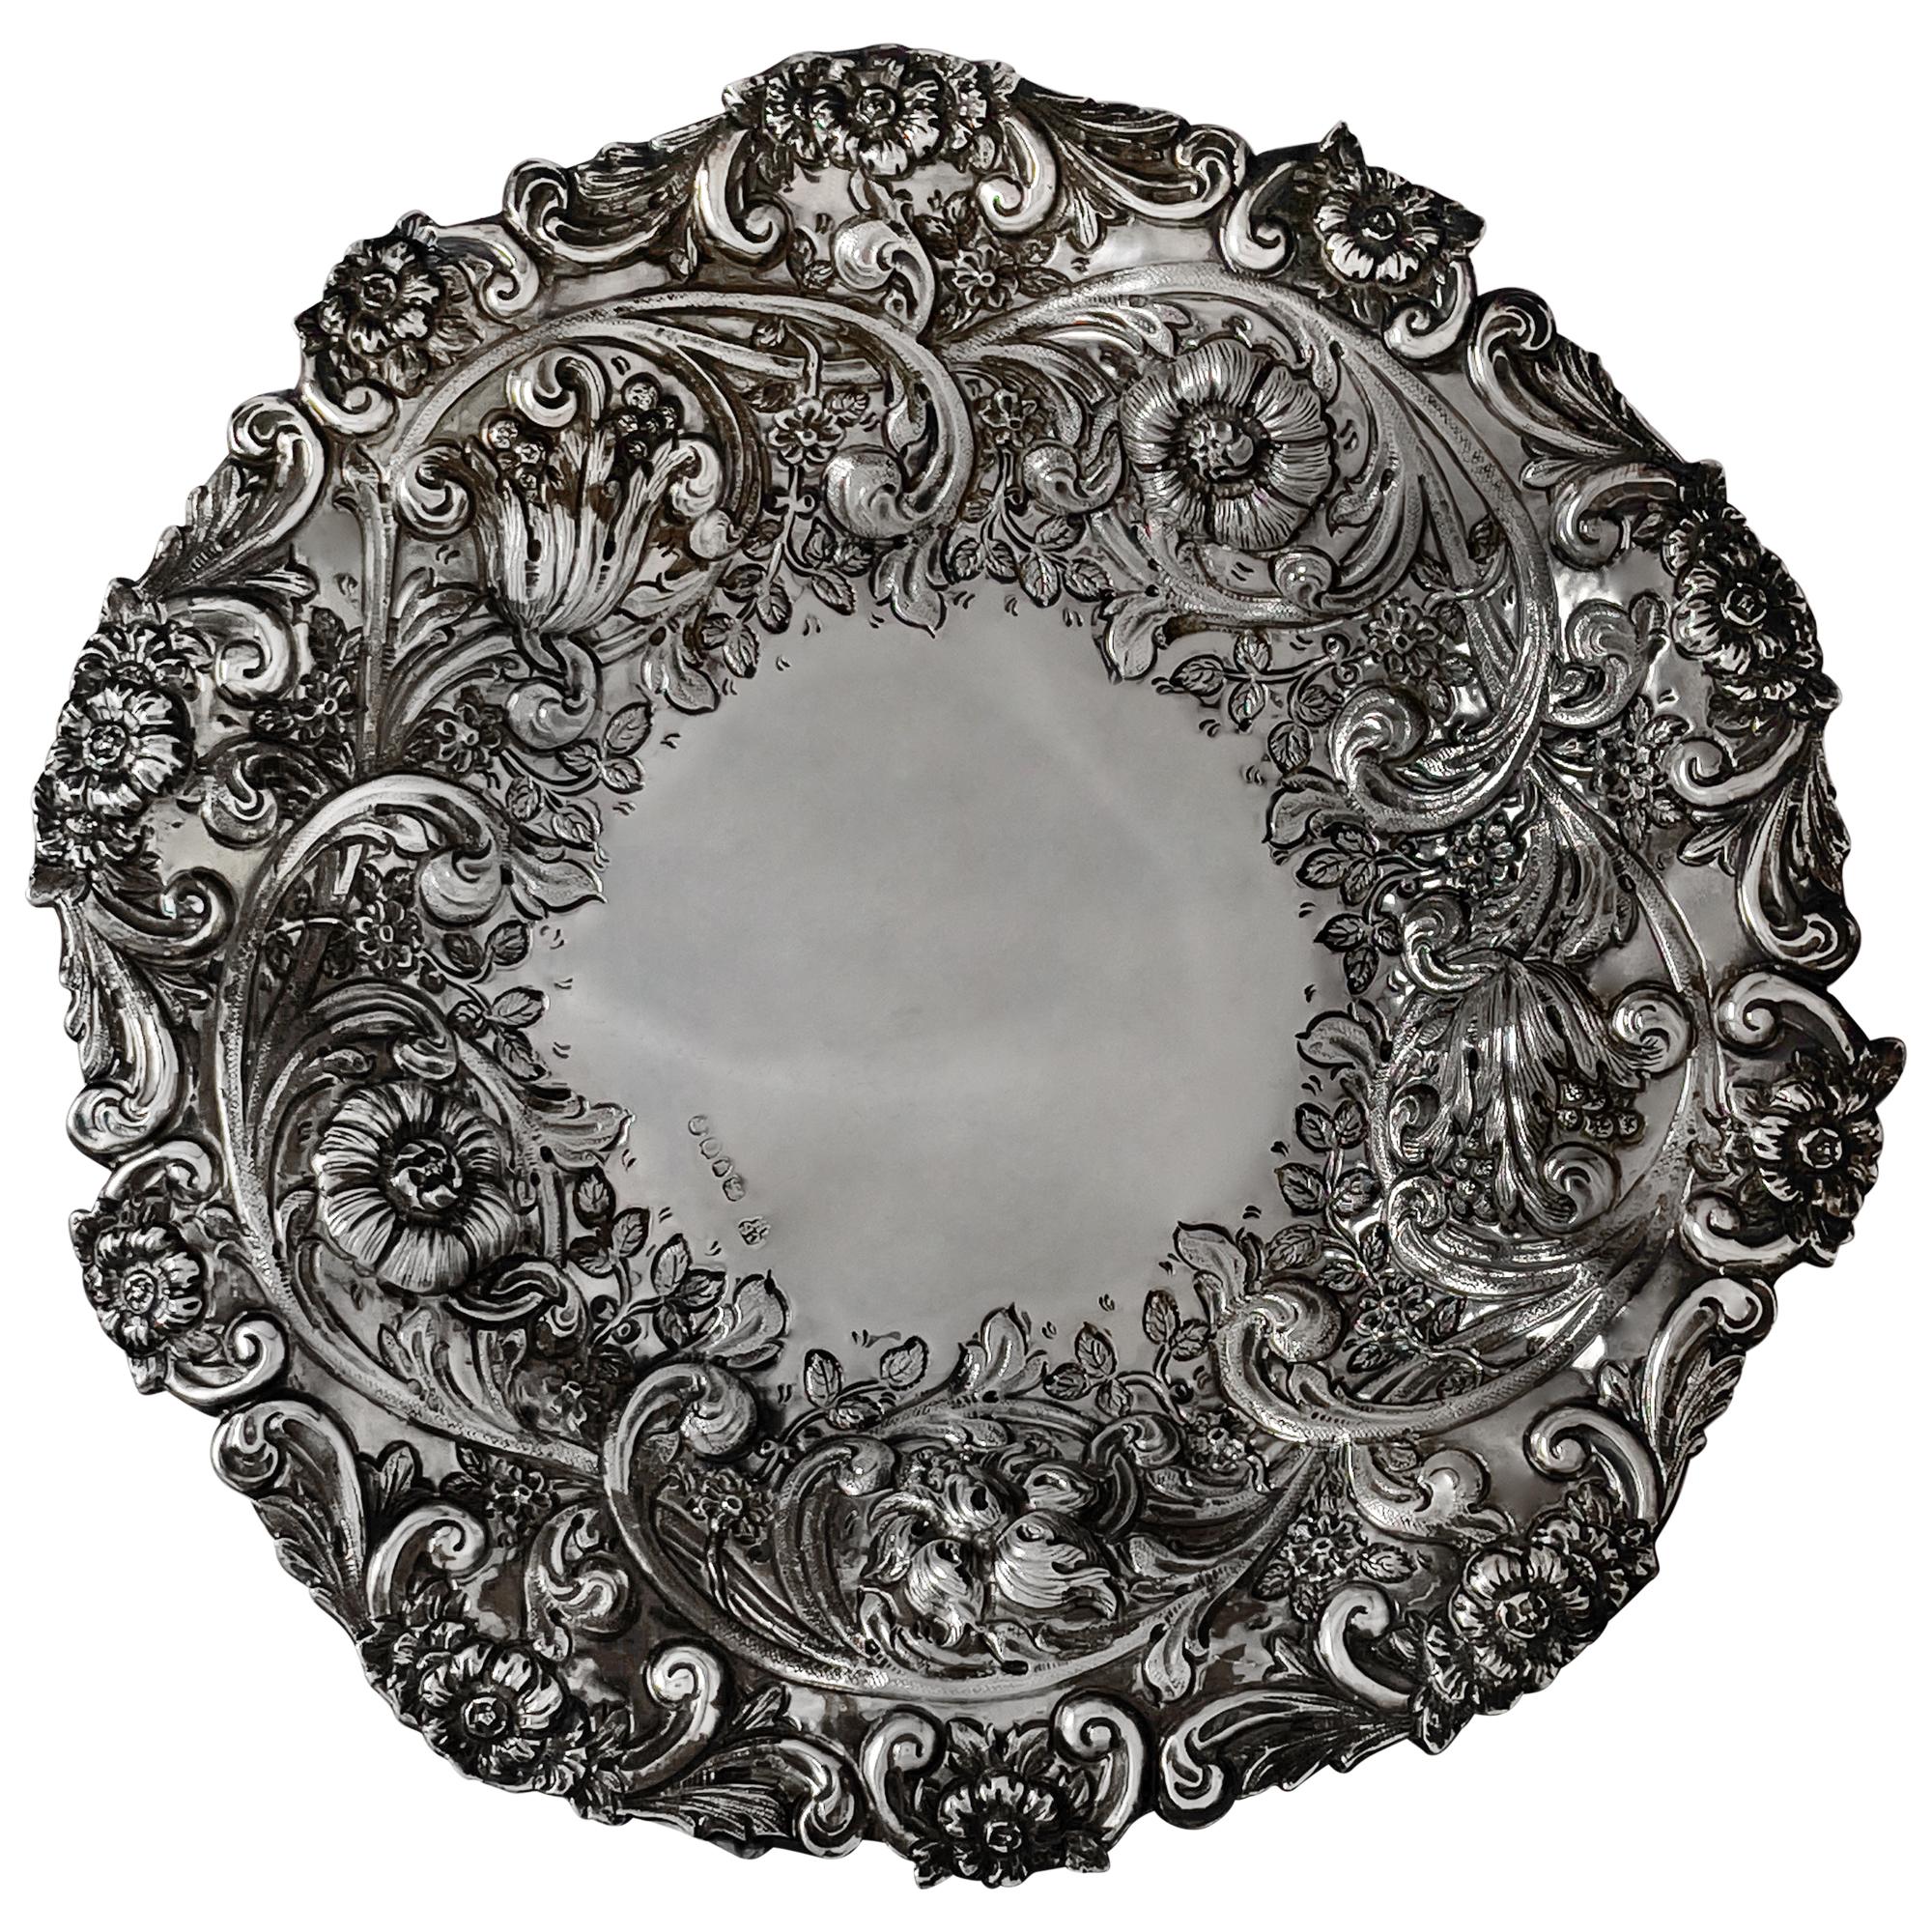 English London Sterling Silver Repousse Presentation Plate, circa 1891 For Sale